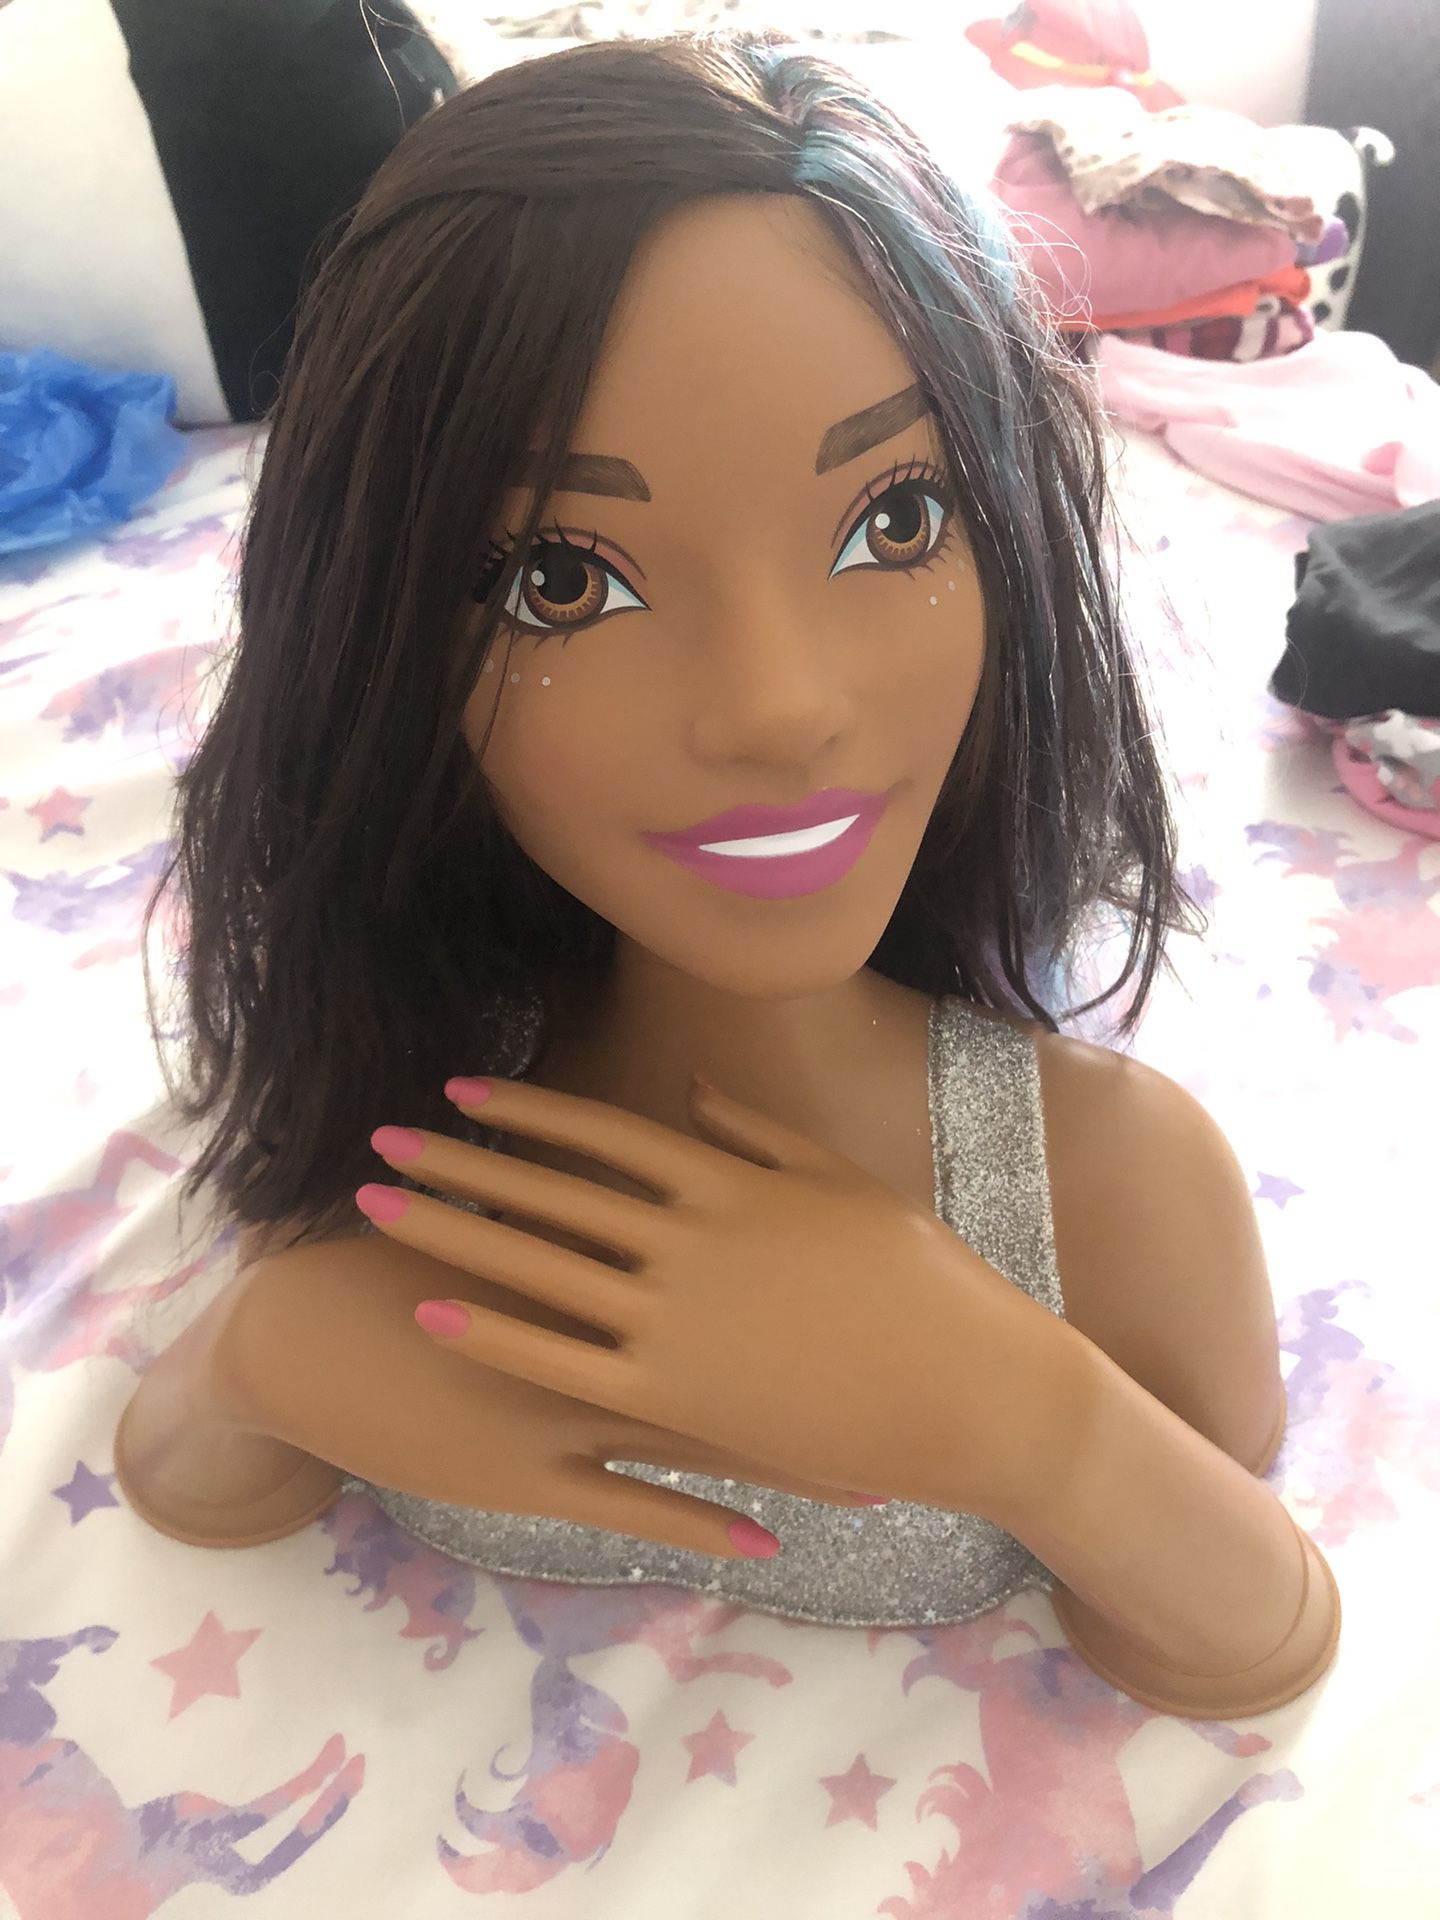 doll for hair and makeup